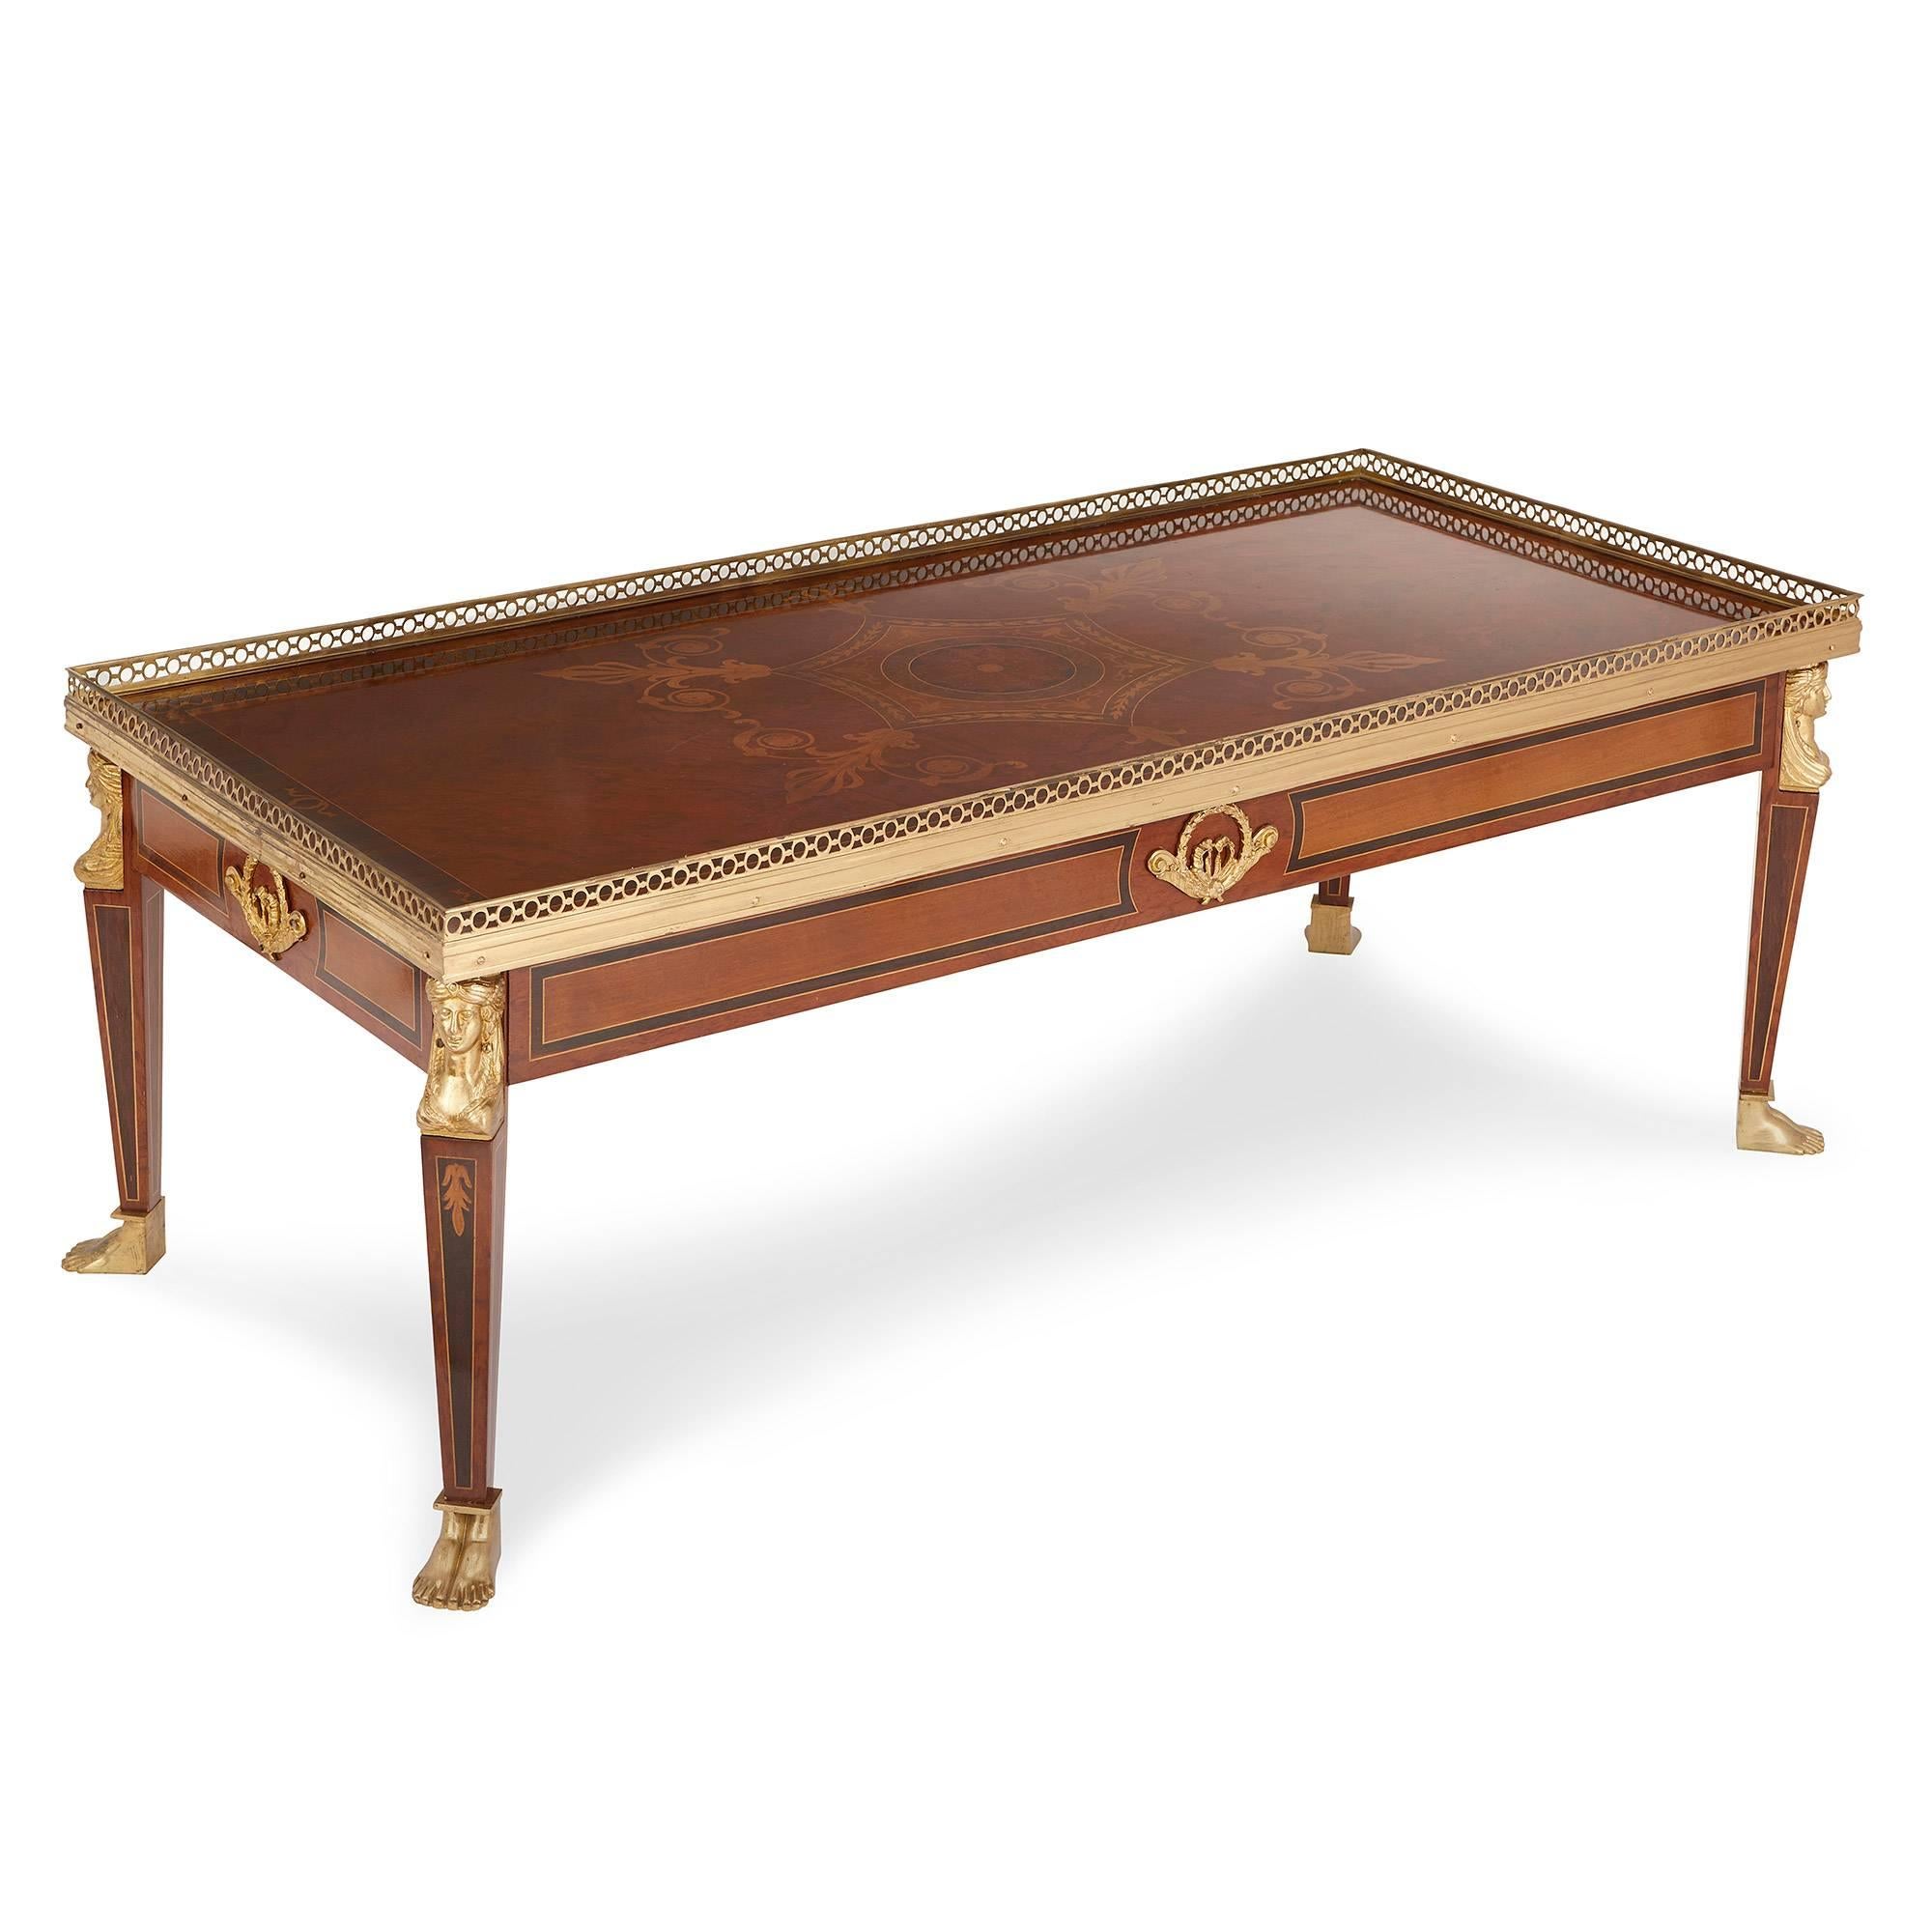 This exquisite coffee table has an understated elegance which will suit both contemporary interiors and more traditionally-minded ones. The table takes inspiration from the opulent, lavish Empire period of the early 19th century, as evinced by the